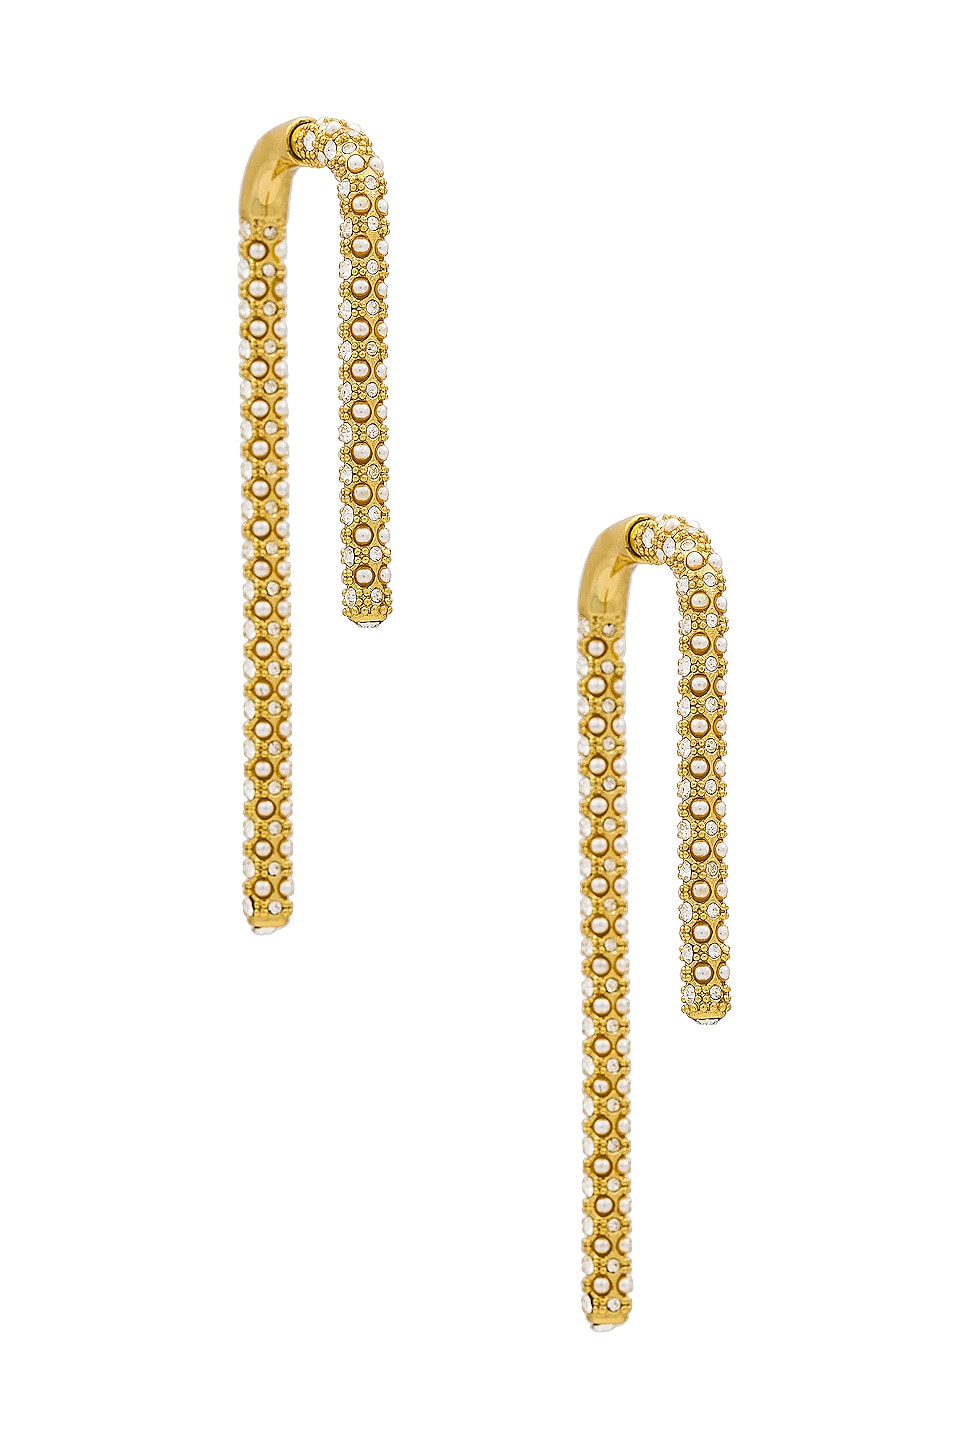 Image 1 of Demarson Pave Celeste Earrings in 12k Shiny Gold, Faux Pearl, & Crystal